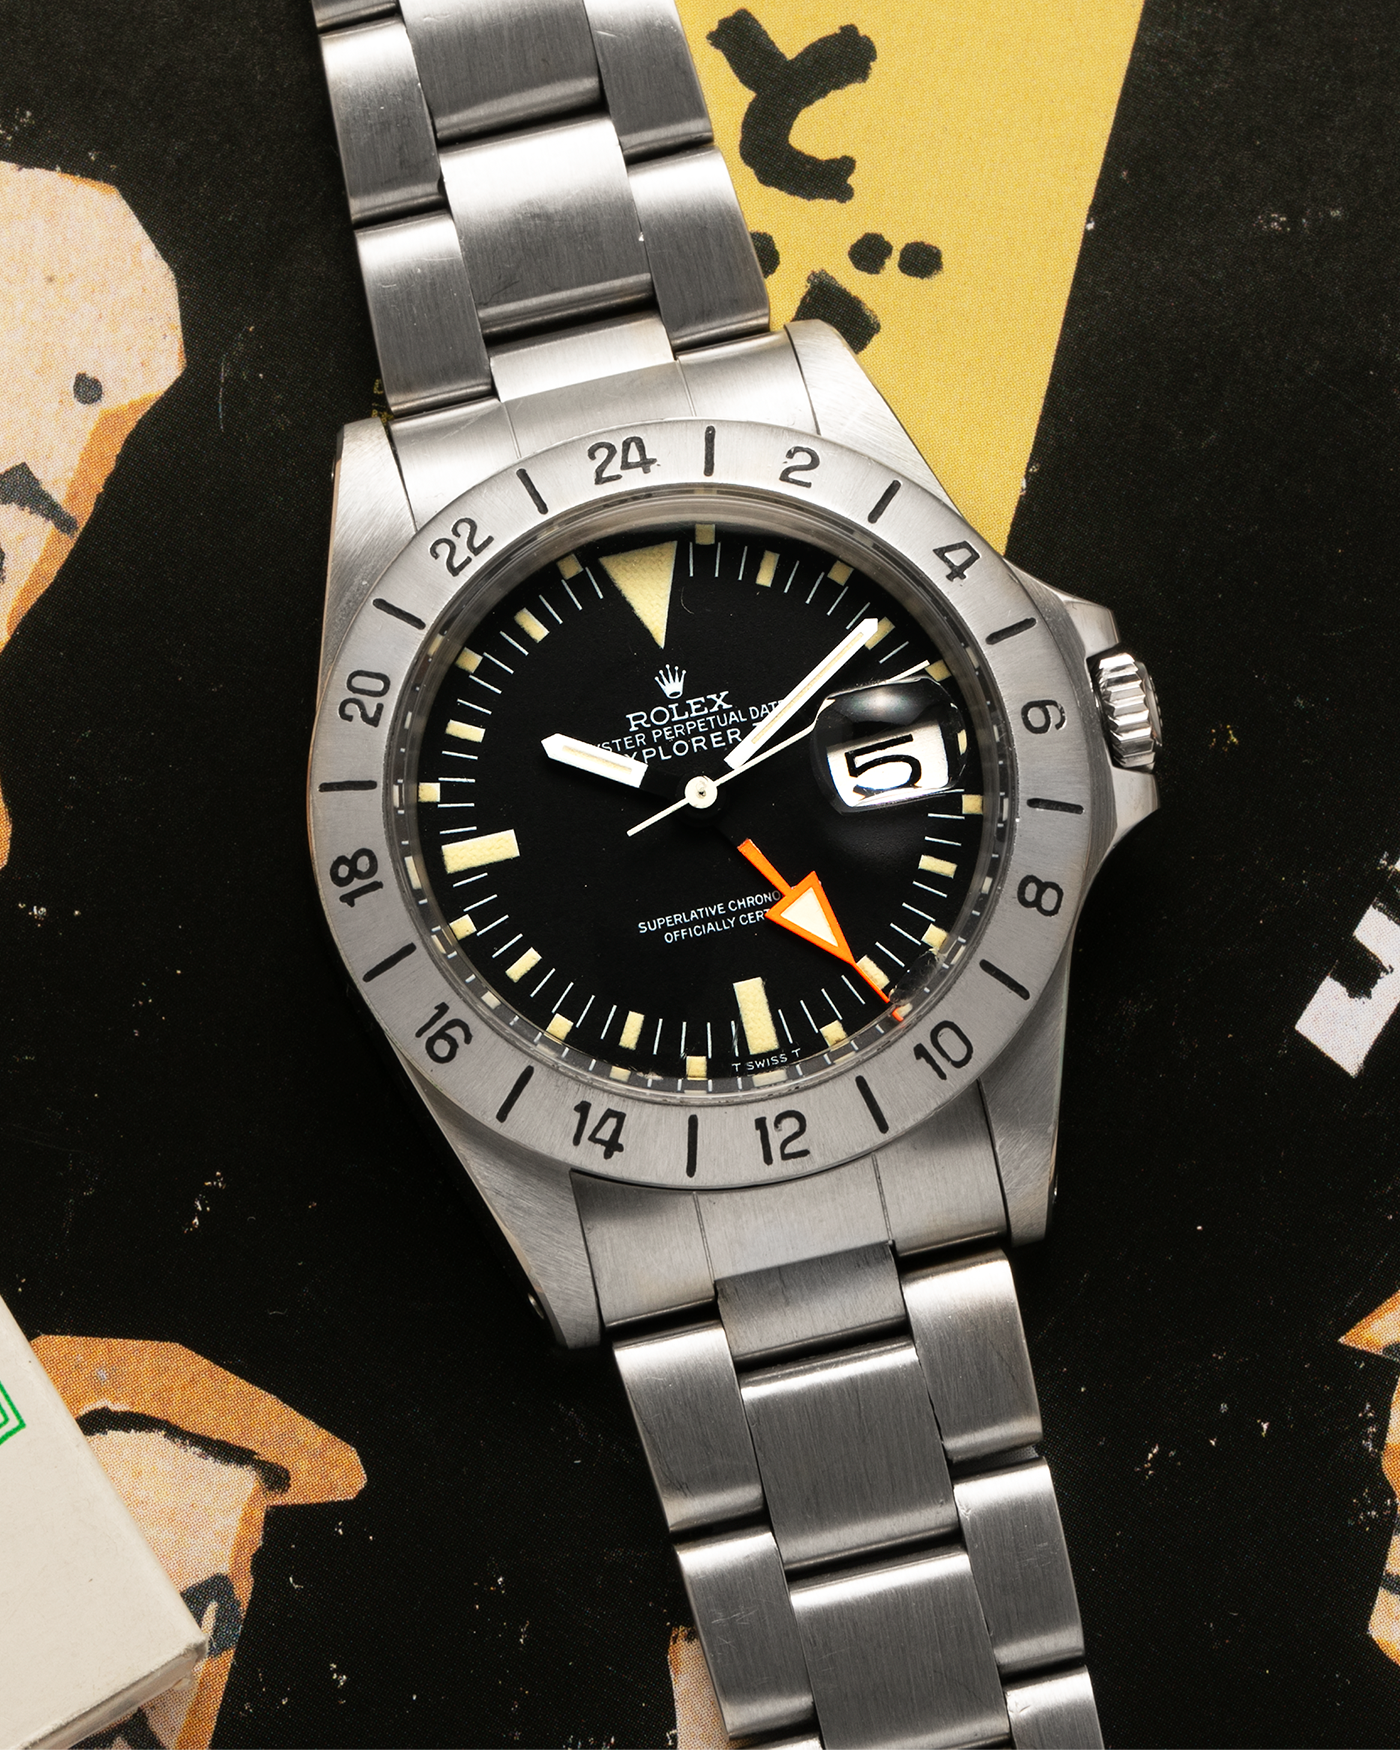 Brand: Rolex Year: 1972 Model: Explorer II ‘Straight Hand’ Reference Number: 1655 Serial Number: 318XXXX Material: Stainless Steel Movement: Rolex Cal. 1575, Self-Winding Case Diameter: 39mm Lug Width: 20mm Bracelet: Rolex VE Steelinox ‘78360’ Oyster Bracelet with ‘580’ Curved End Links, additional Rolex C&I Riveted Bracelet